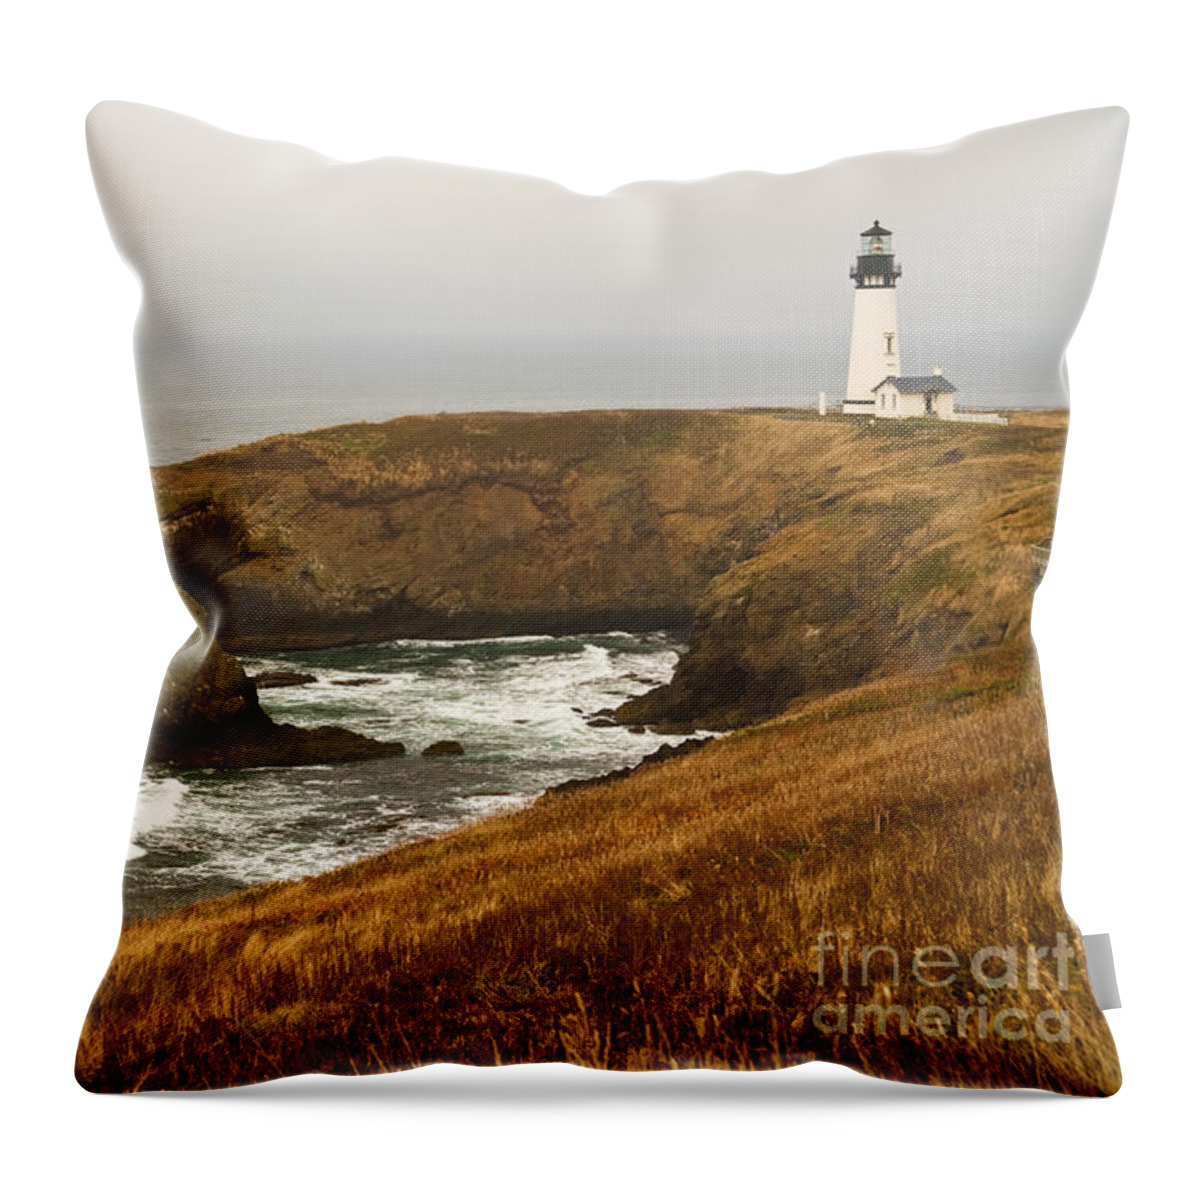 Lighthouse Throw Pillow featuring the photograph Yaquina Head Lighthouse by Alice Cahill